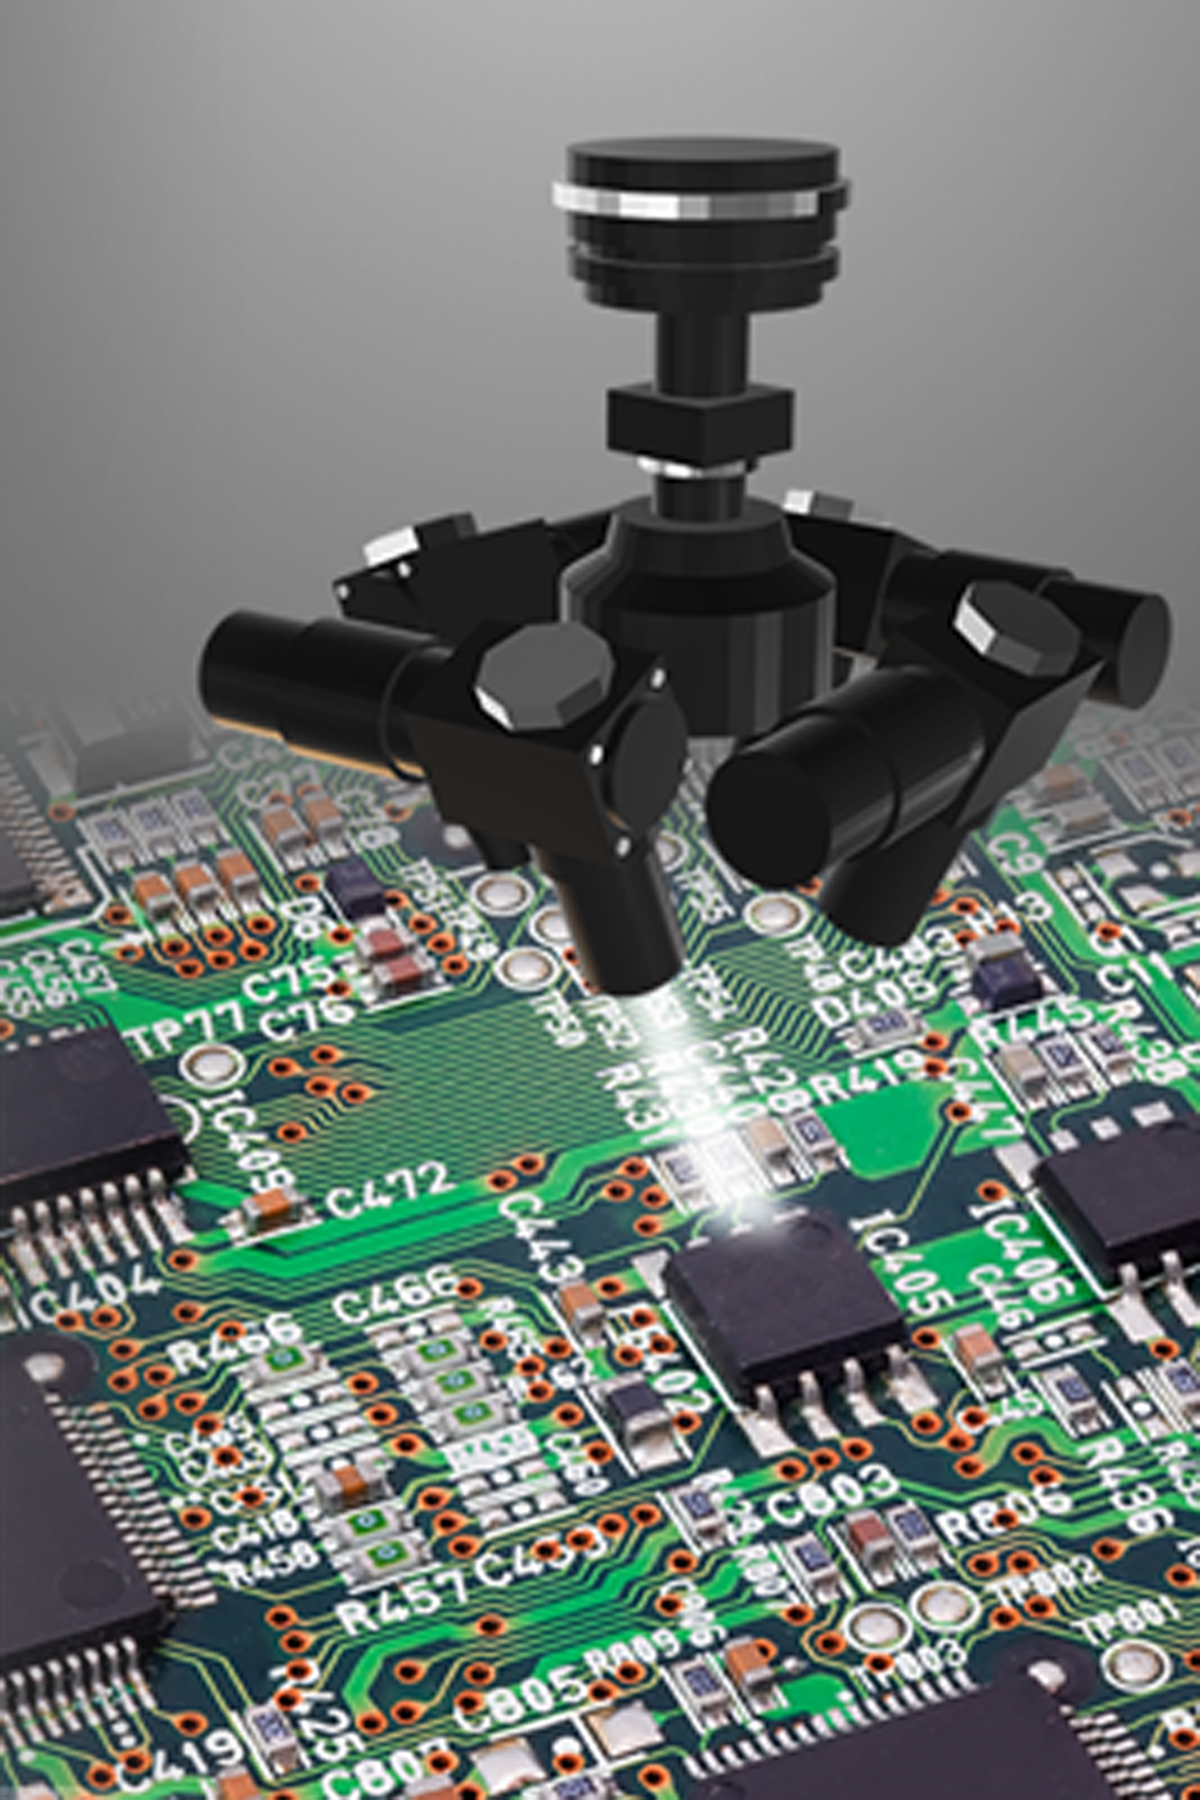 Improve printed circuit board (PCB) with 3D inspection - DLP technology - Technical articles - TI E2E support forums